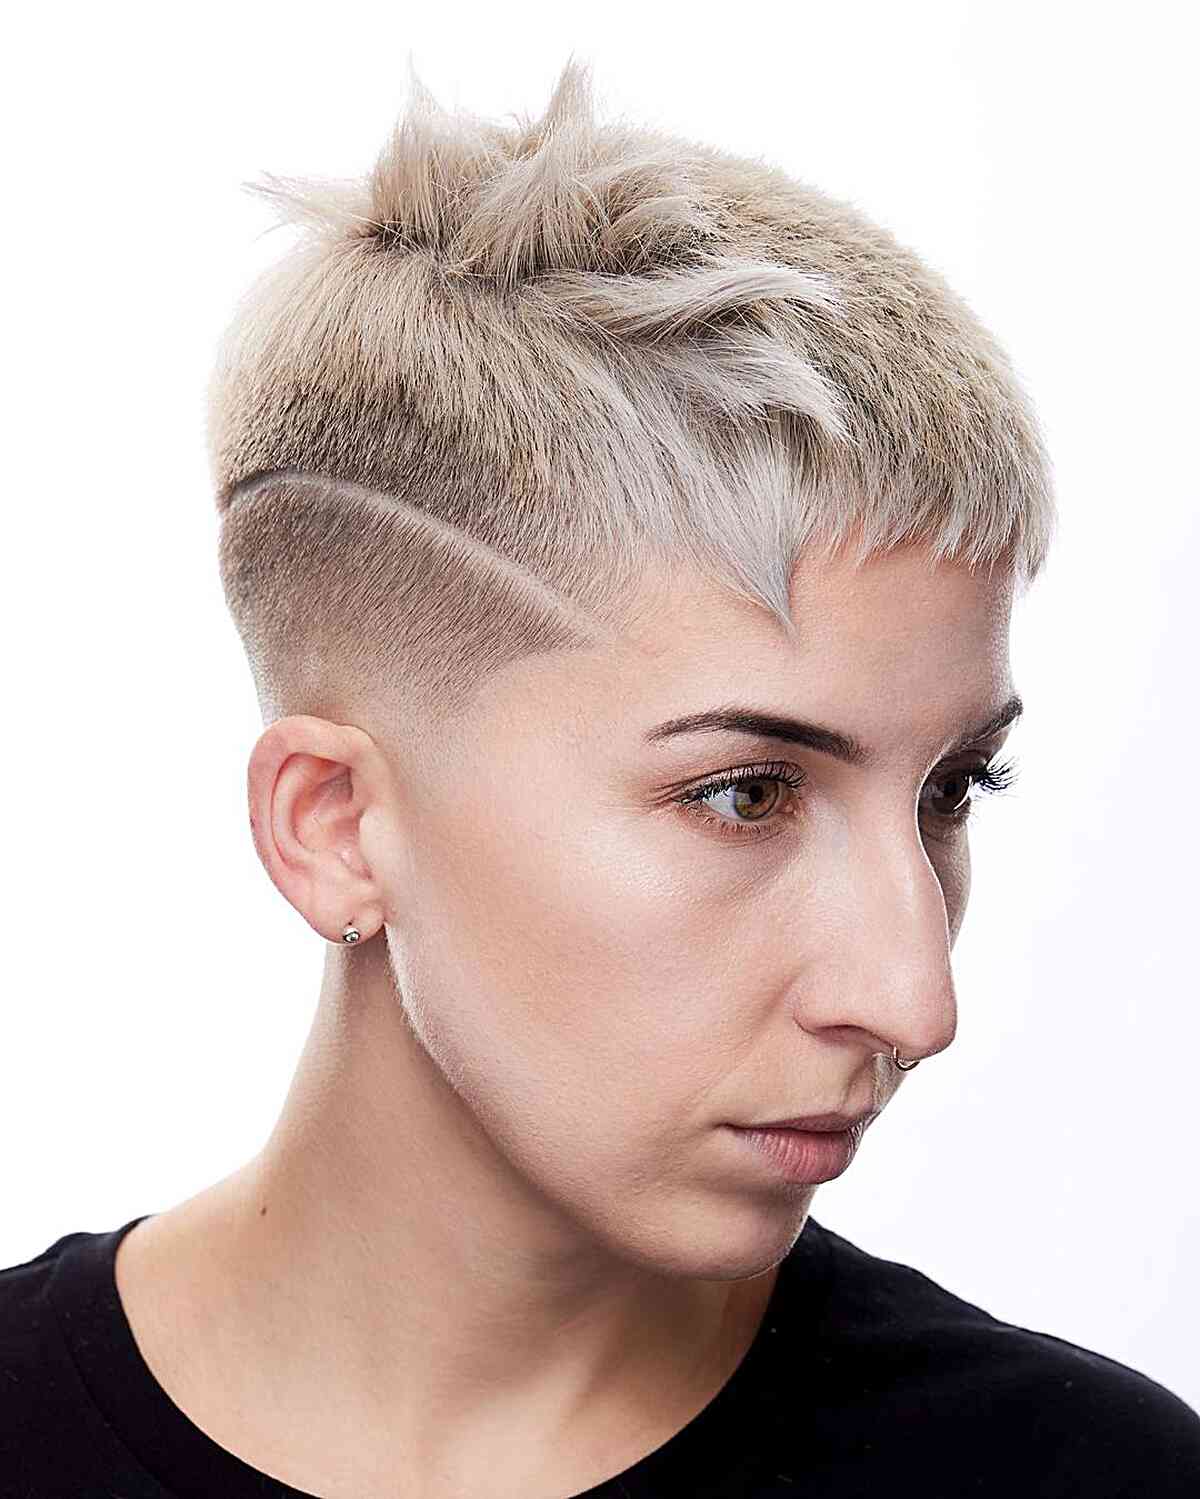 Edgy Disconnected Pixie with an Undercut and Shaved Line